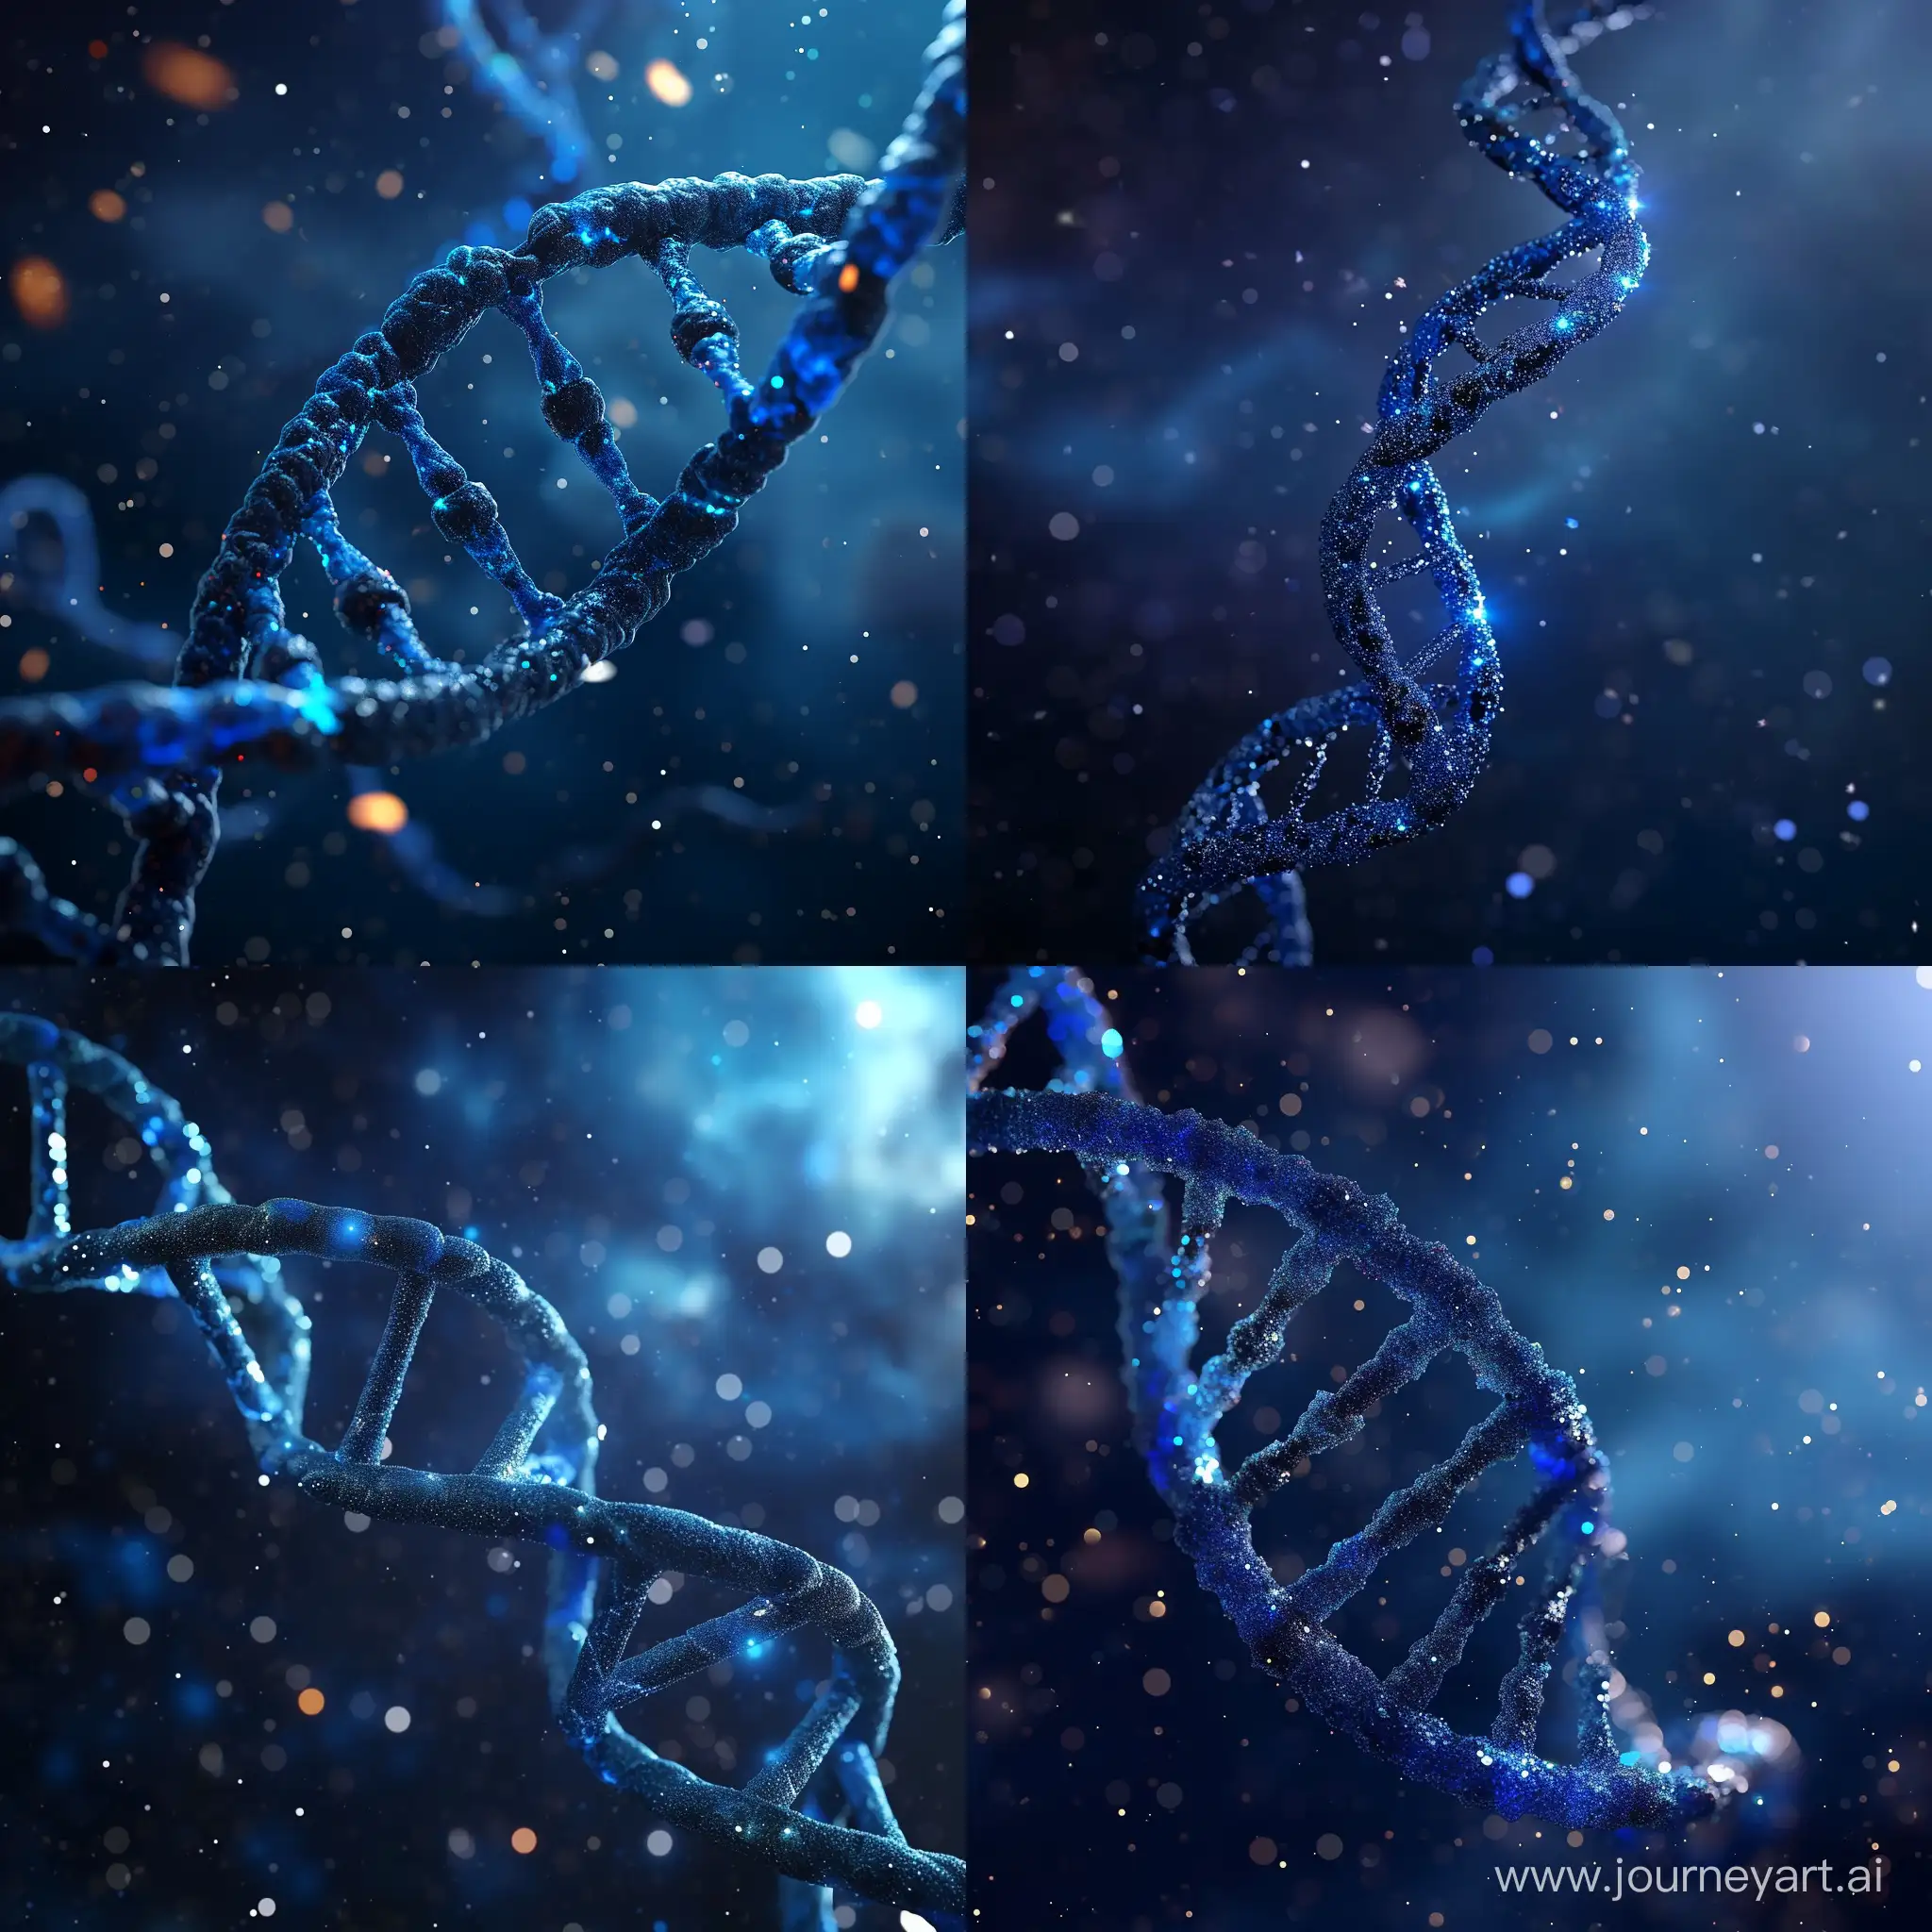 Minimalistic-3D-DNA-Model-Soaring-in-Blue-Space